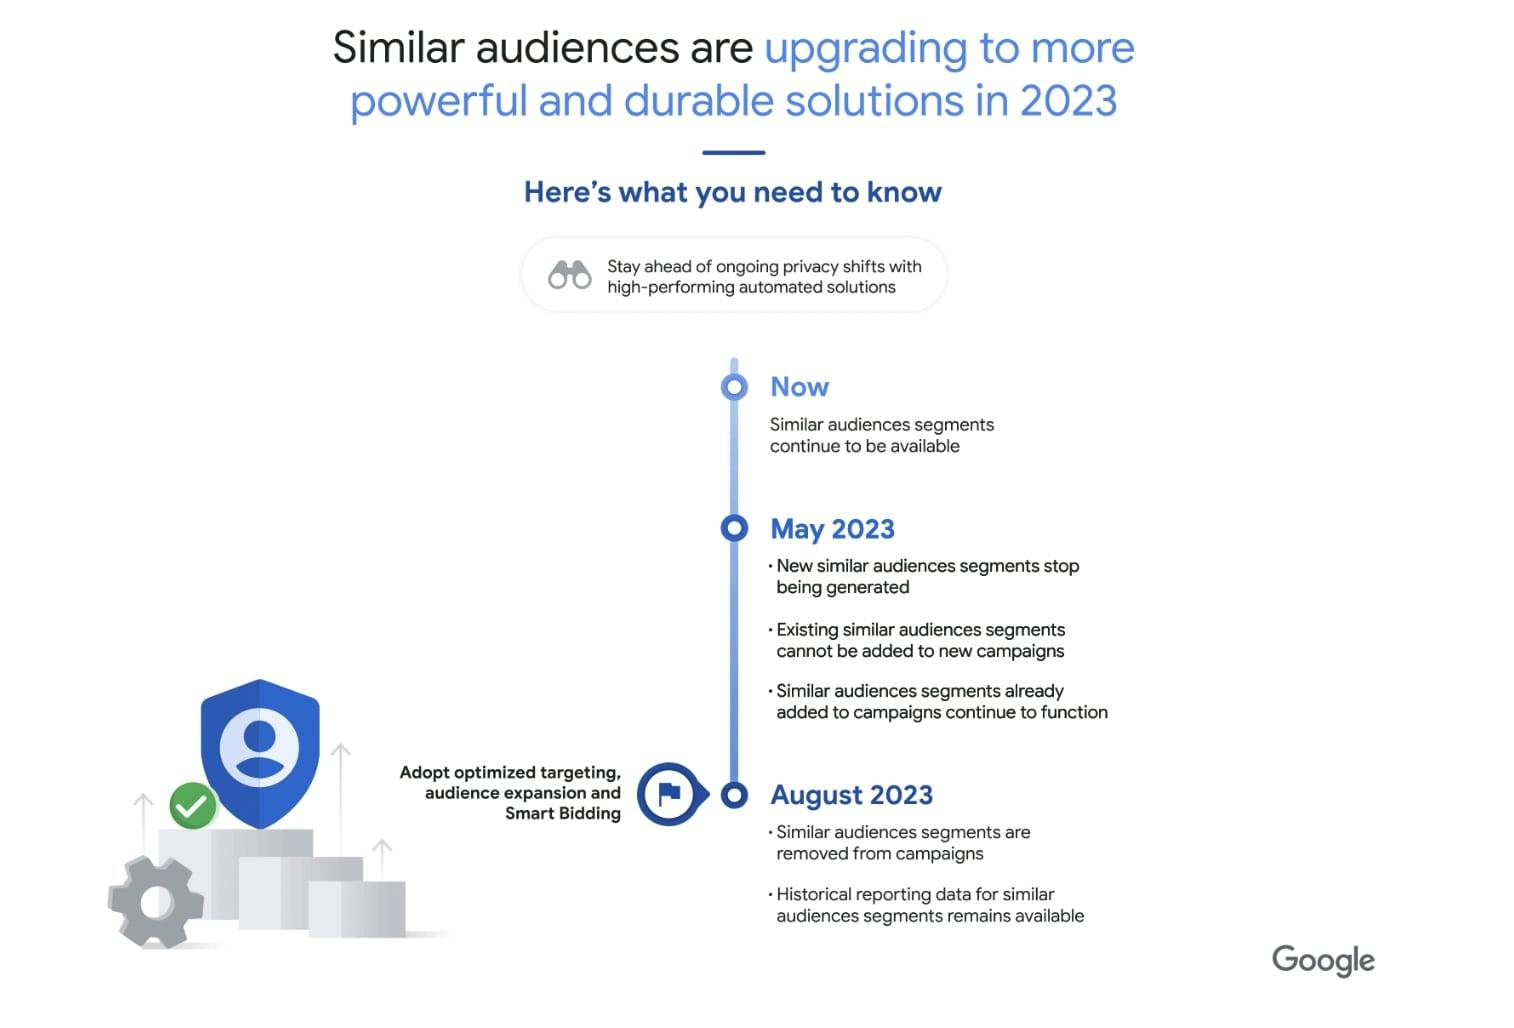 Text: Similar audiences are upgrading to more powerful and durable solutions in 2023. Here's what you need to know. Now: Similar audiences segments continue to be available. May 2023: New similar audiences segments stop being generated. August 2023: Similar audiences segments are removed from campaigns.